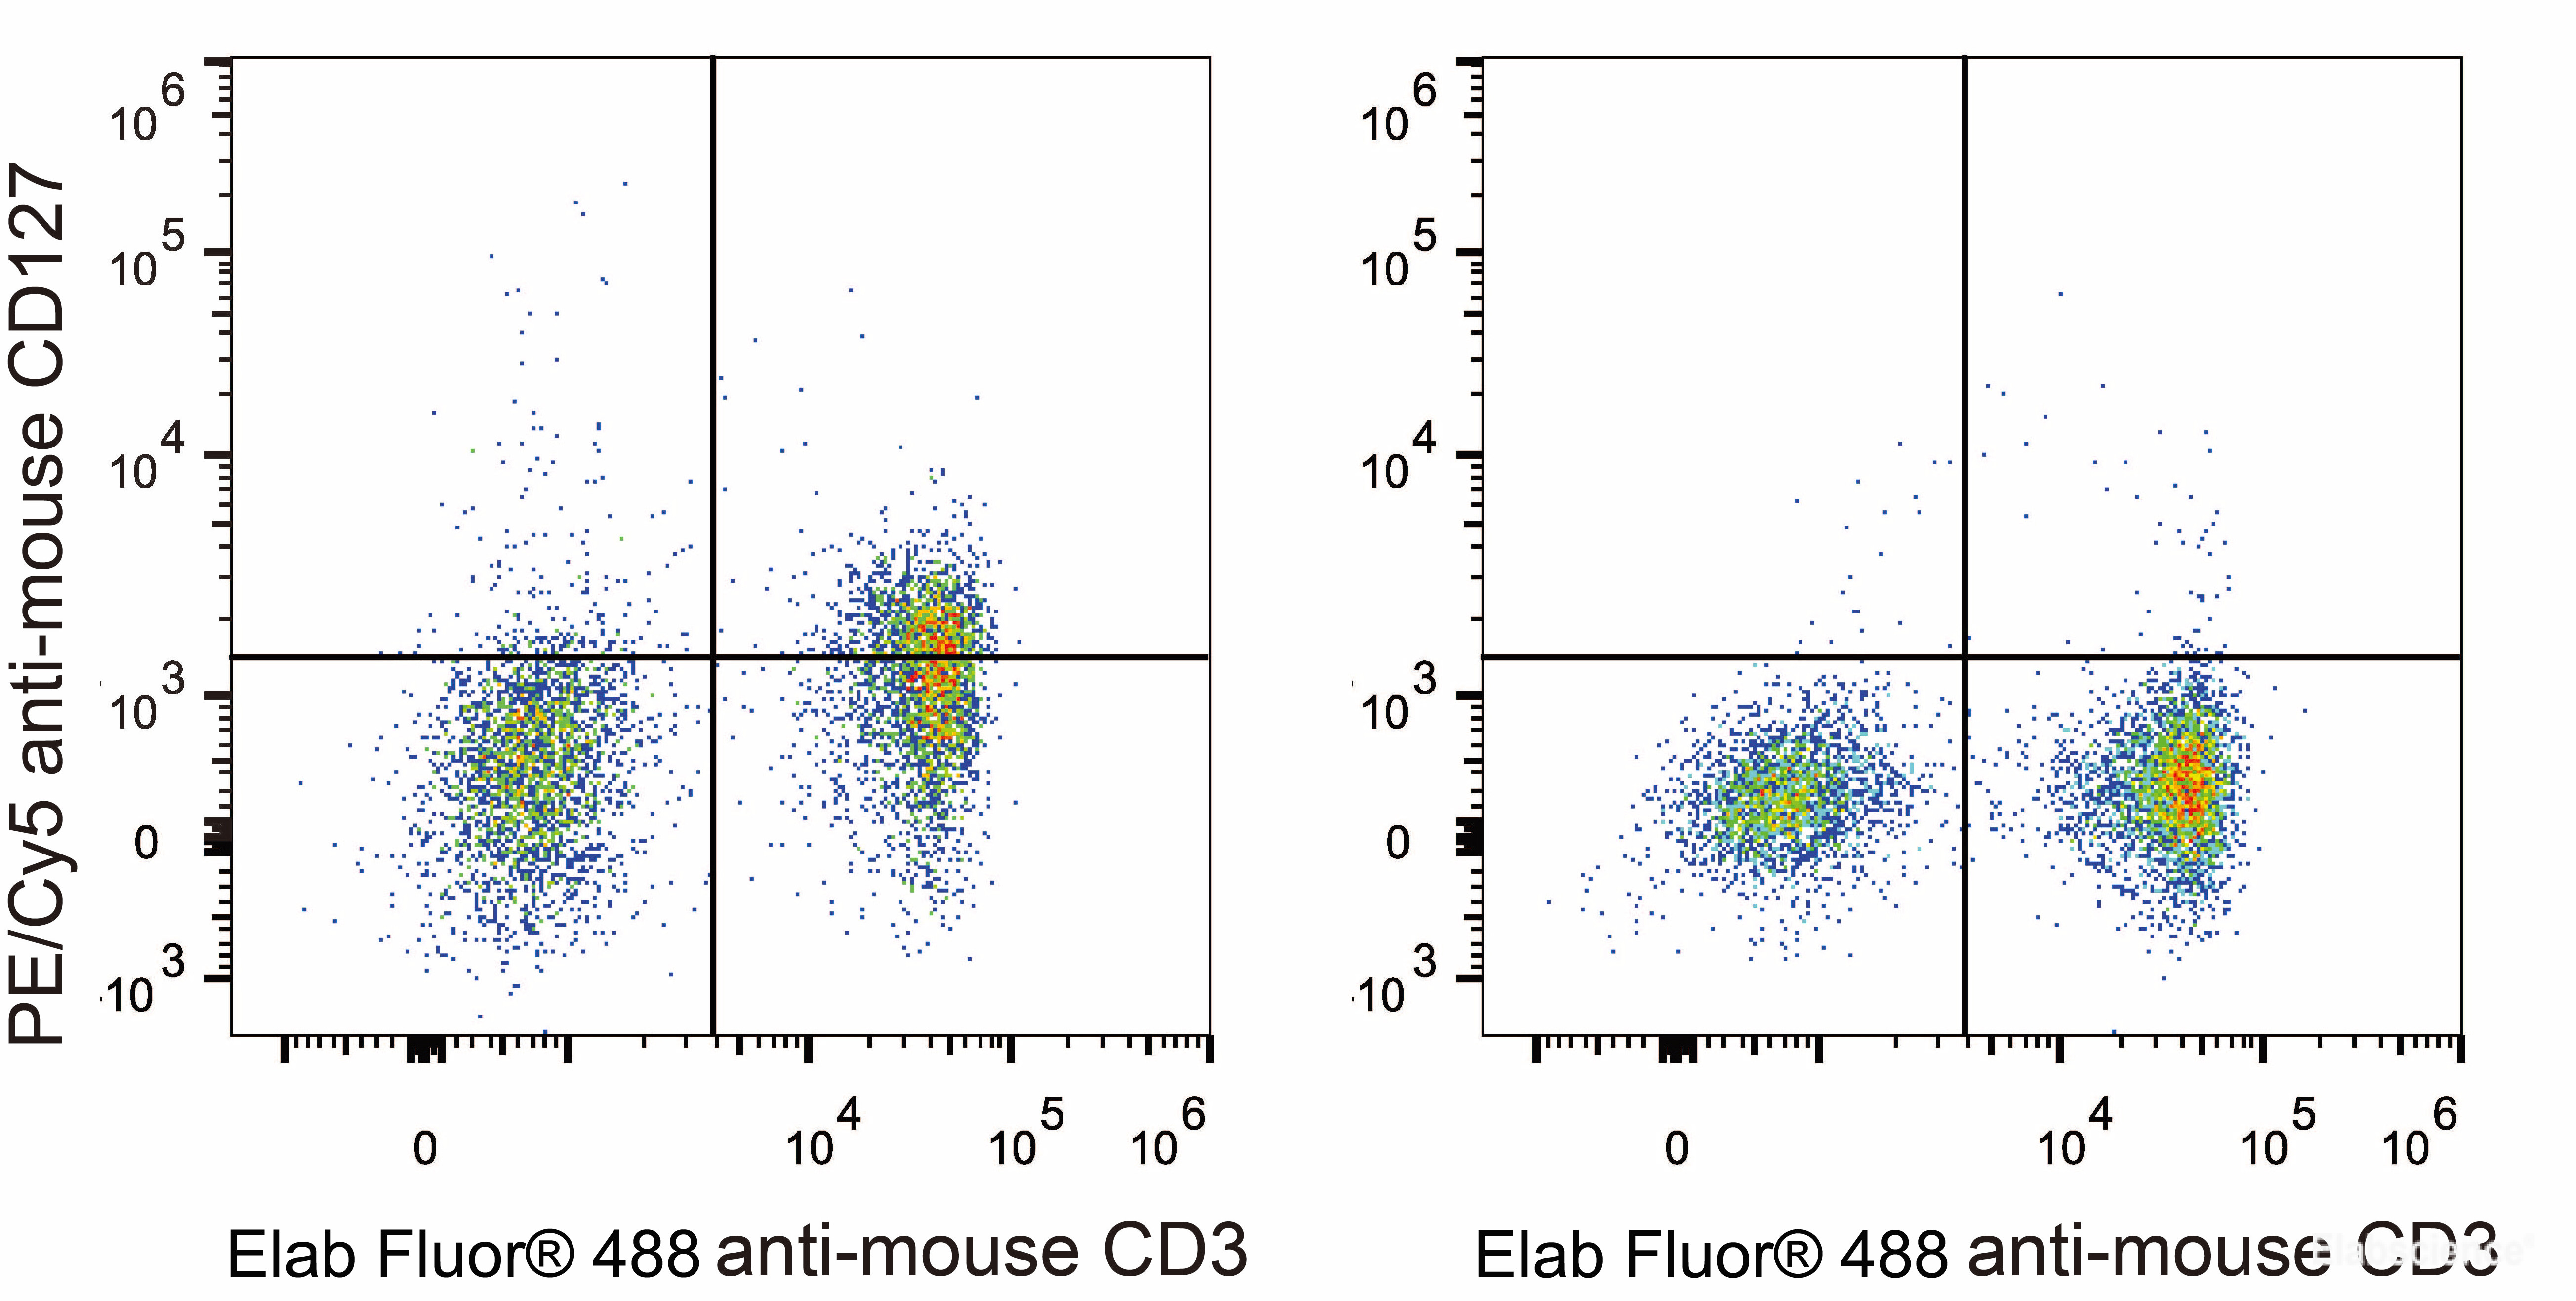 C57BL/6 murine splenocytes are stained with PE/Cyanine5 Anti-Mouse CD127/IL-7RA Antibody and Elab Fluor<sup>®</sup> 488 Anti-Mouse CD3 Antibody (Left). Splenocytes stained with Elab Fluor<sup>®</sup> 488 Anti-Mouse CD3 Antibody (Right) are used as control.